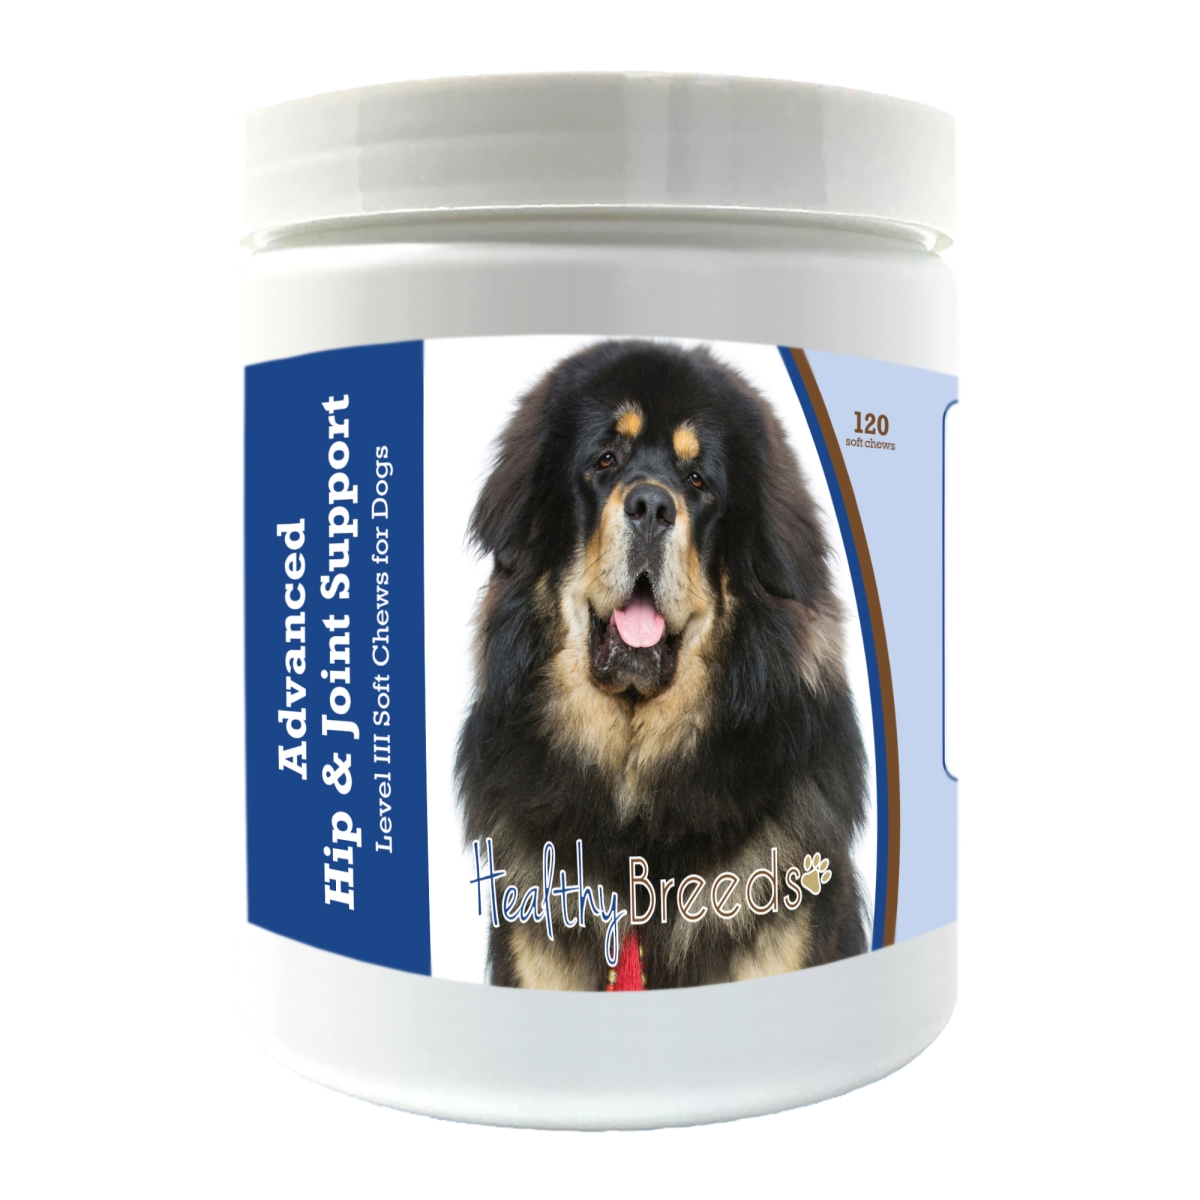 Picture of Healthy Breeds 192959899412 Tibetan Mastiff Advanced Hip & Joint Support Level III Soft Chews for Dogs